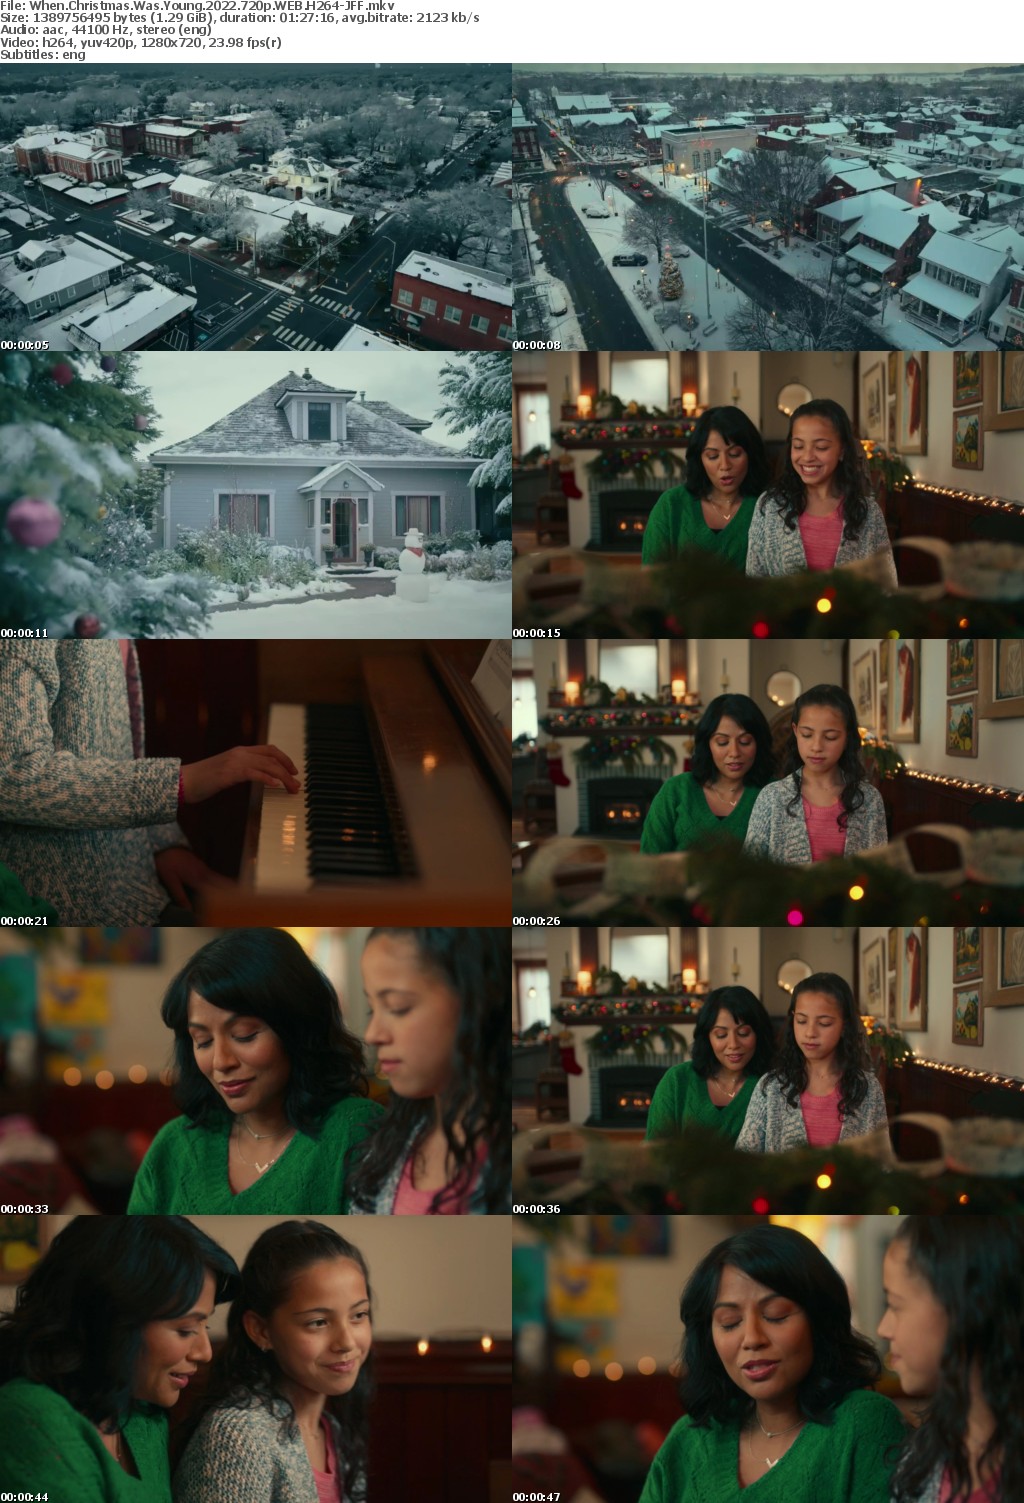 When Christmas Was Young 2022 720p WEB H264-JFF